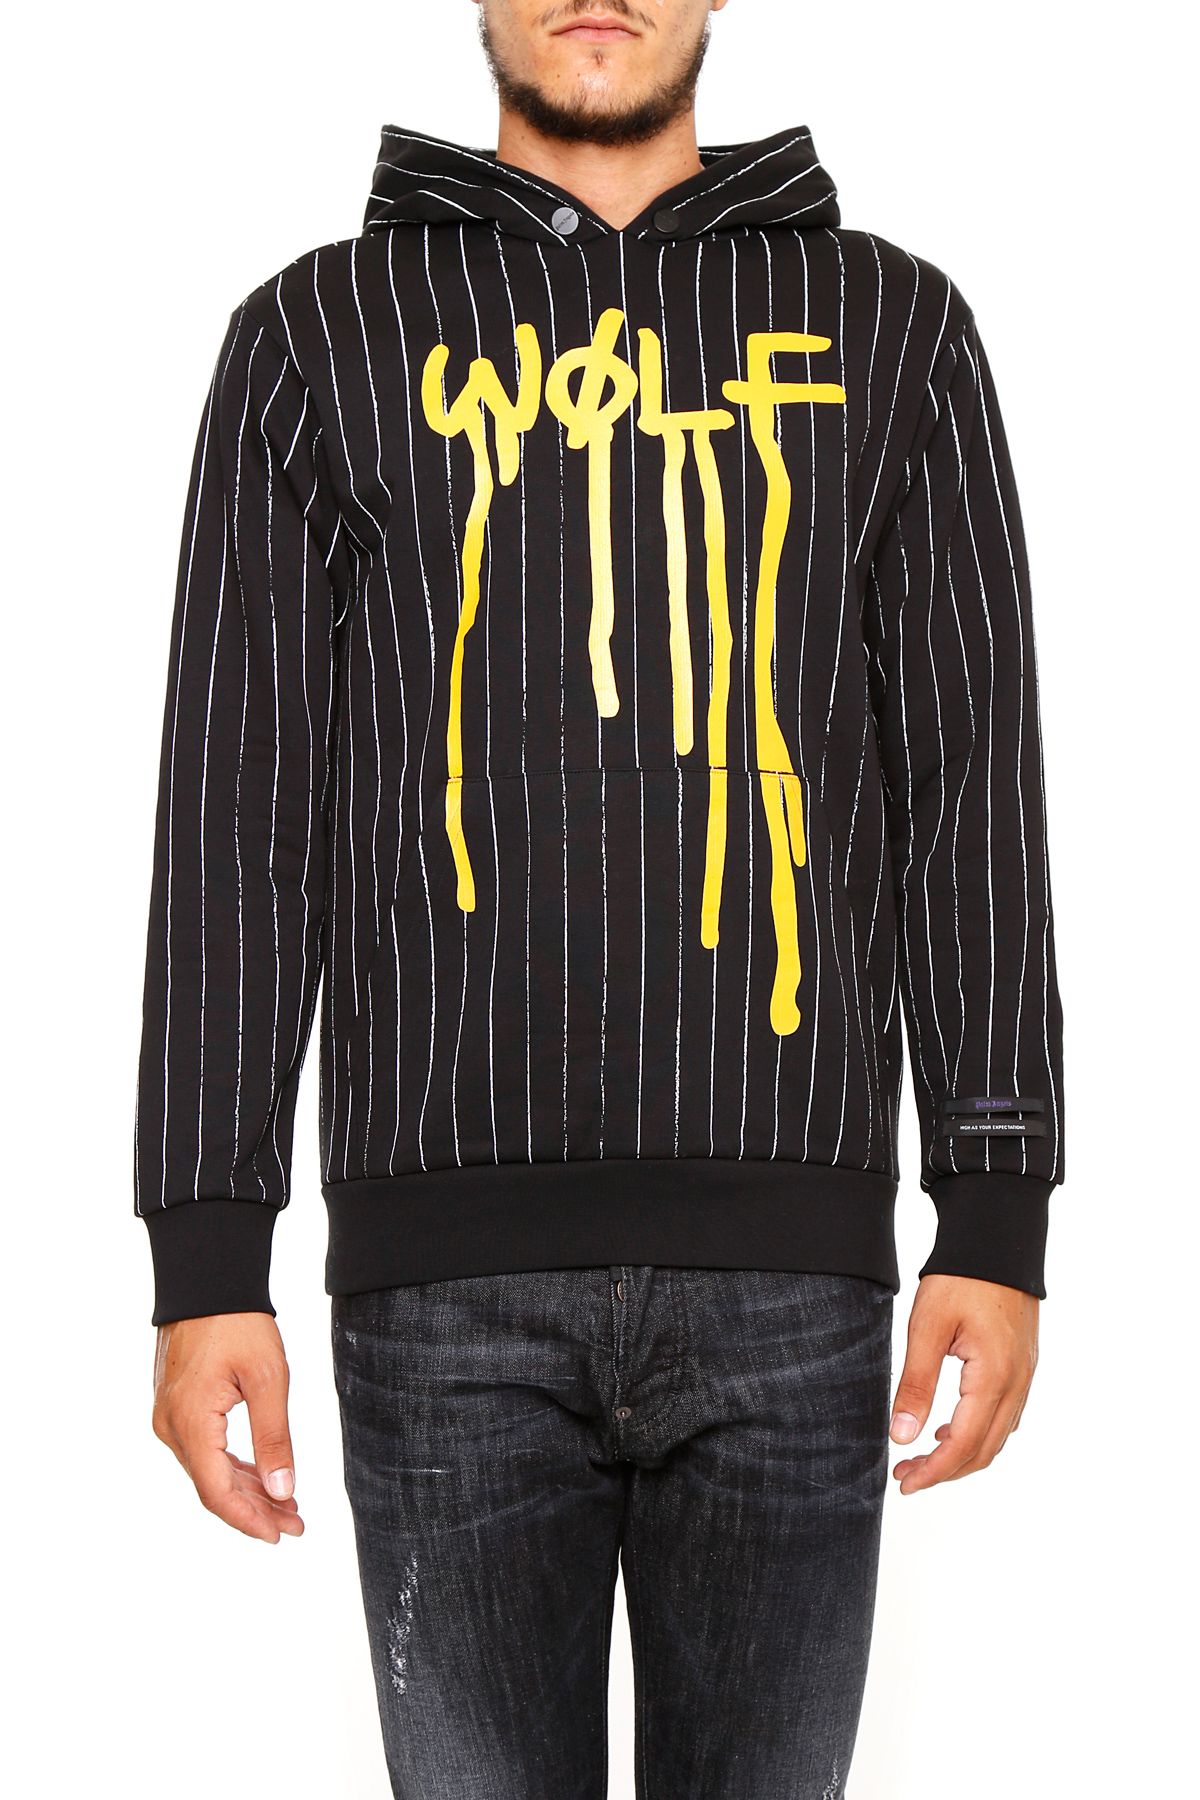 Palm Angels - Dripping Wolf Hoodie - ALL OVER YELLOW|Giallo, Men's ...